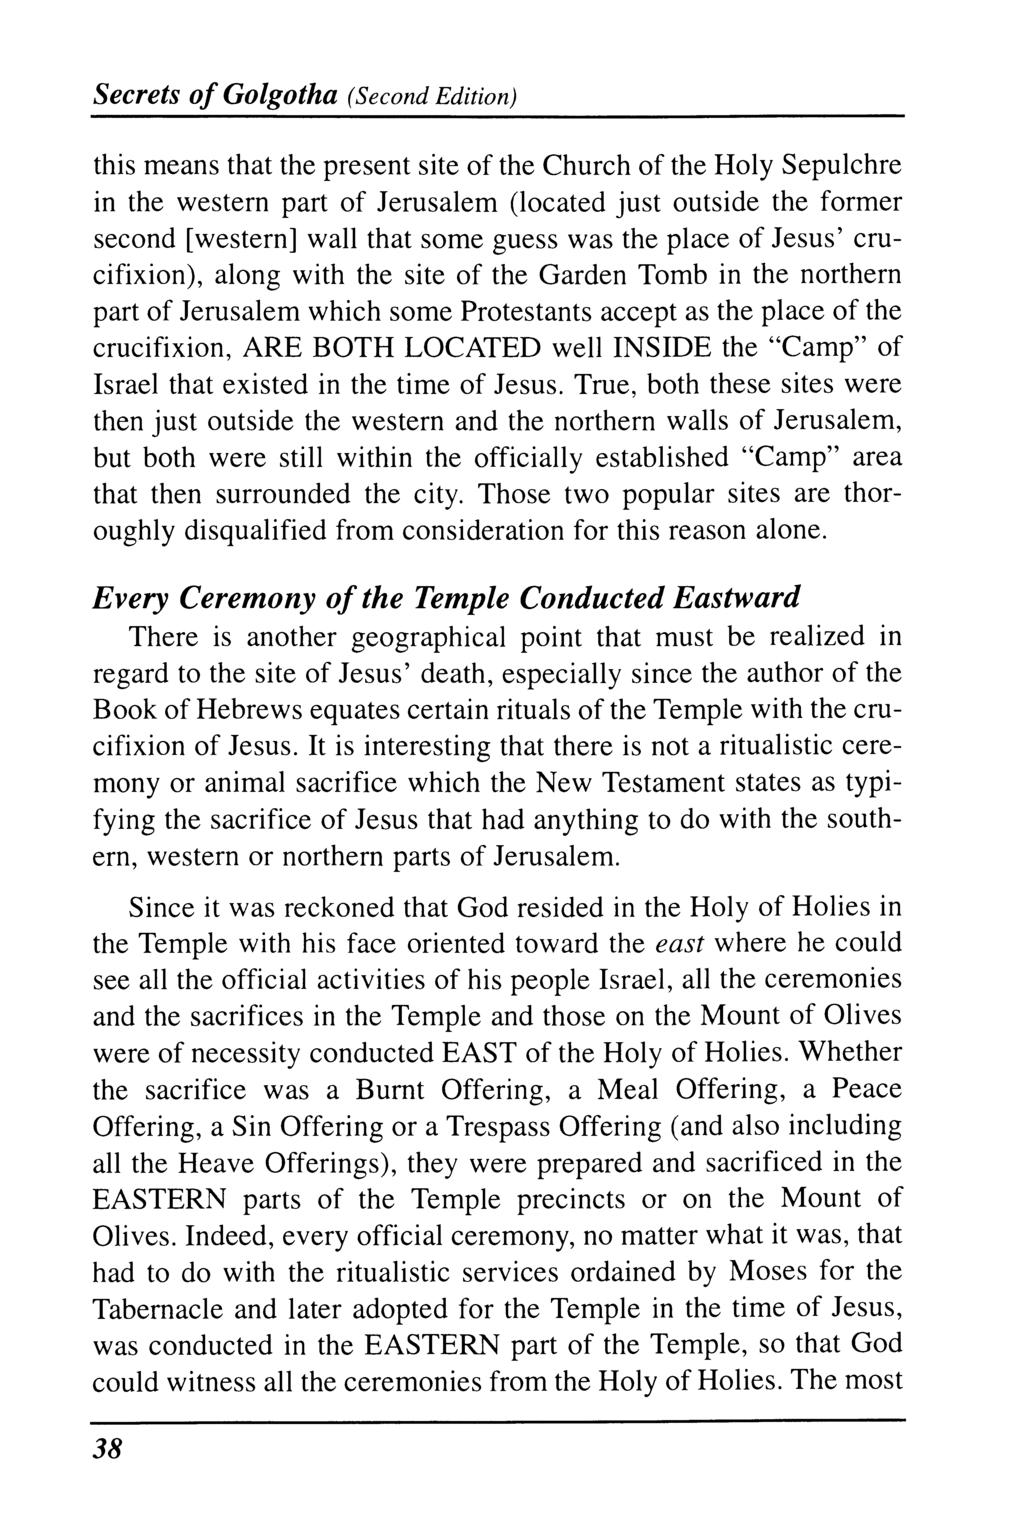 Secrets of Golgotha (Second Edition) this means that the present site of the Church of the Holy Sepulchre in the western part of Jerusalem (located just outside the former second [western] wall that